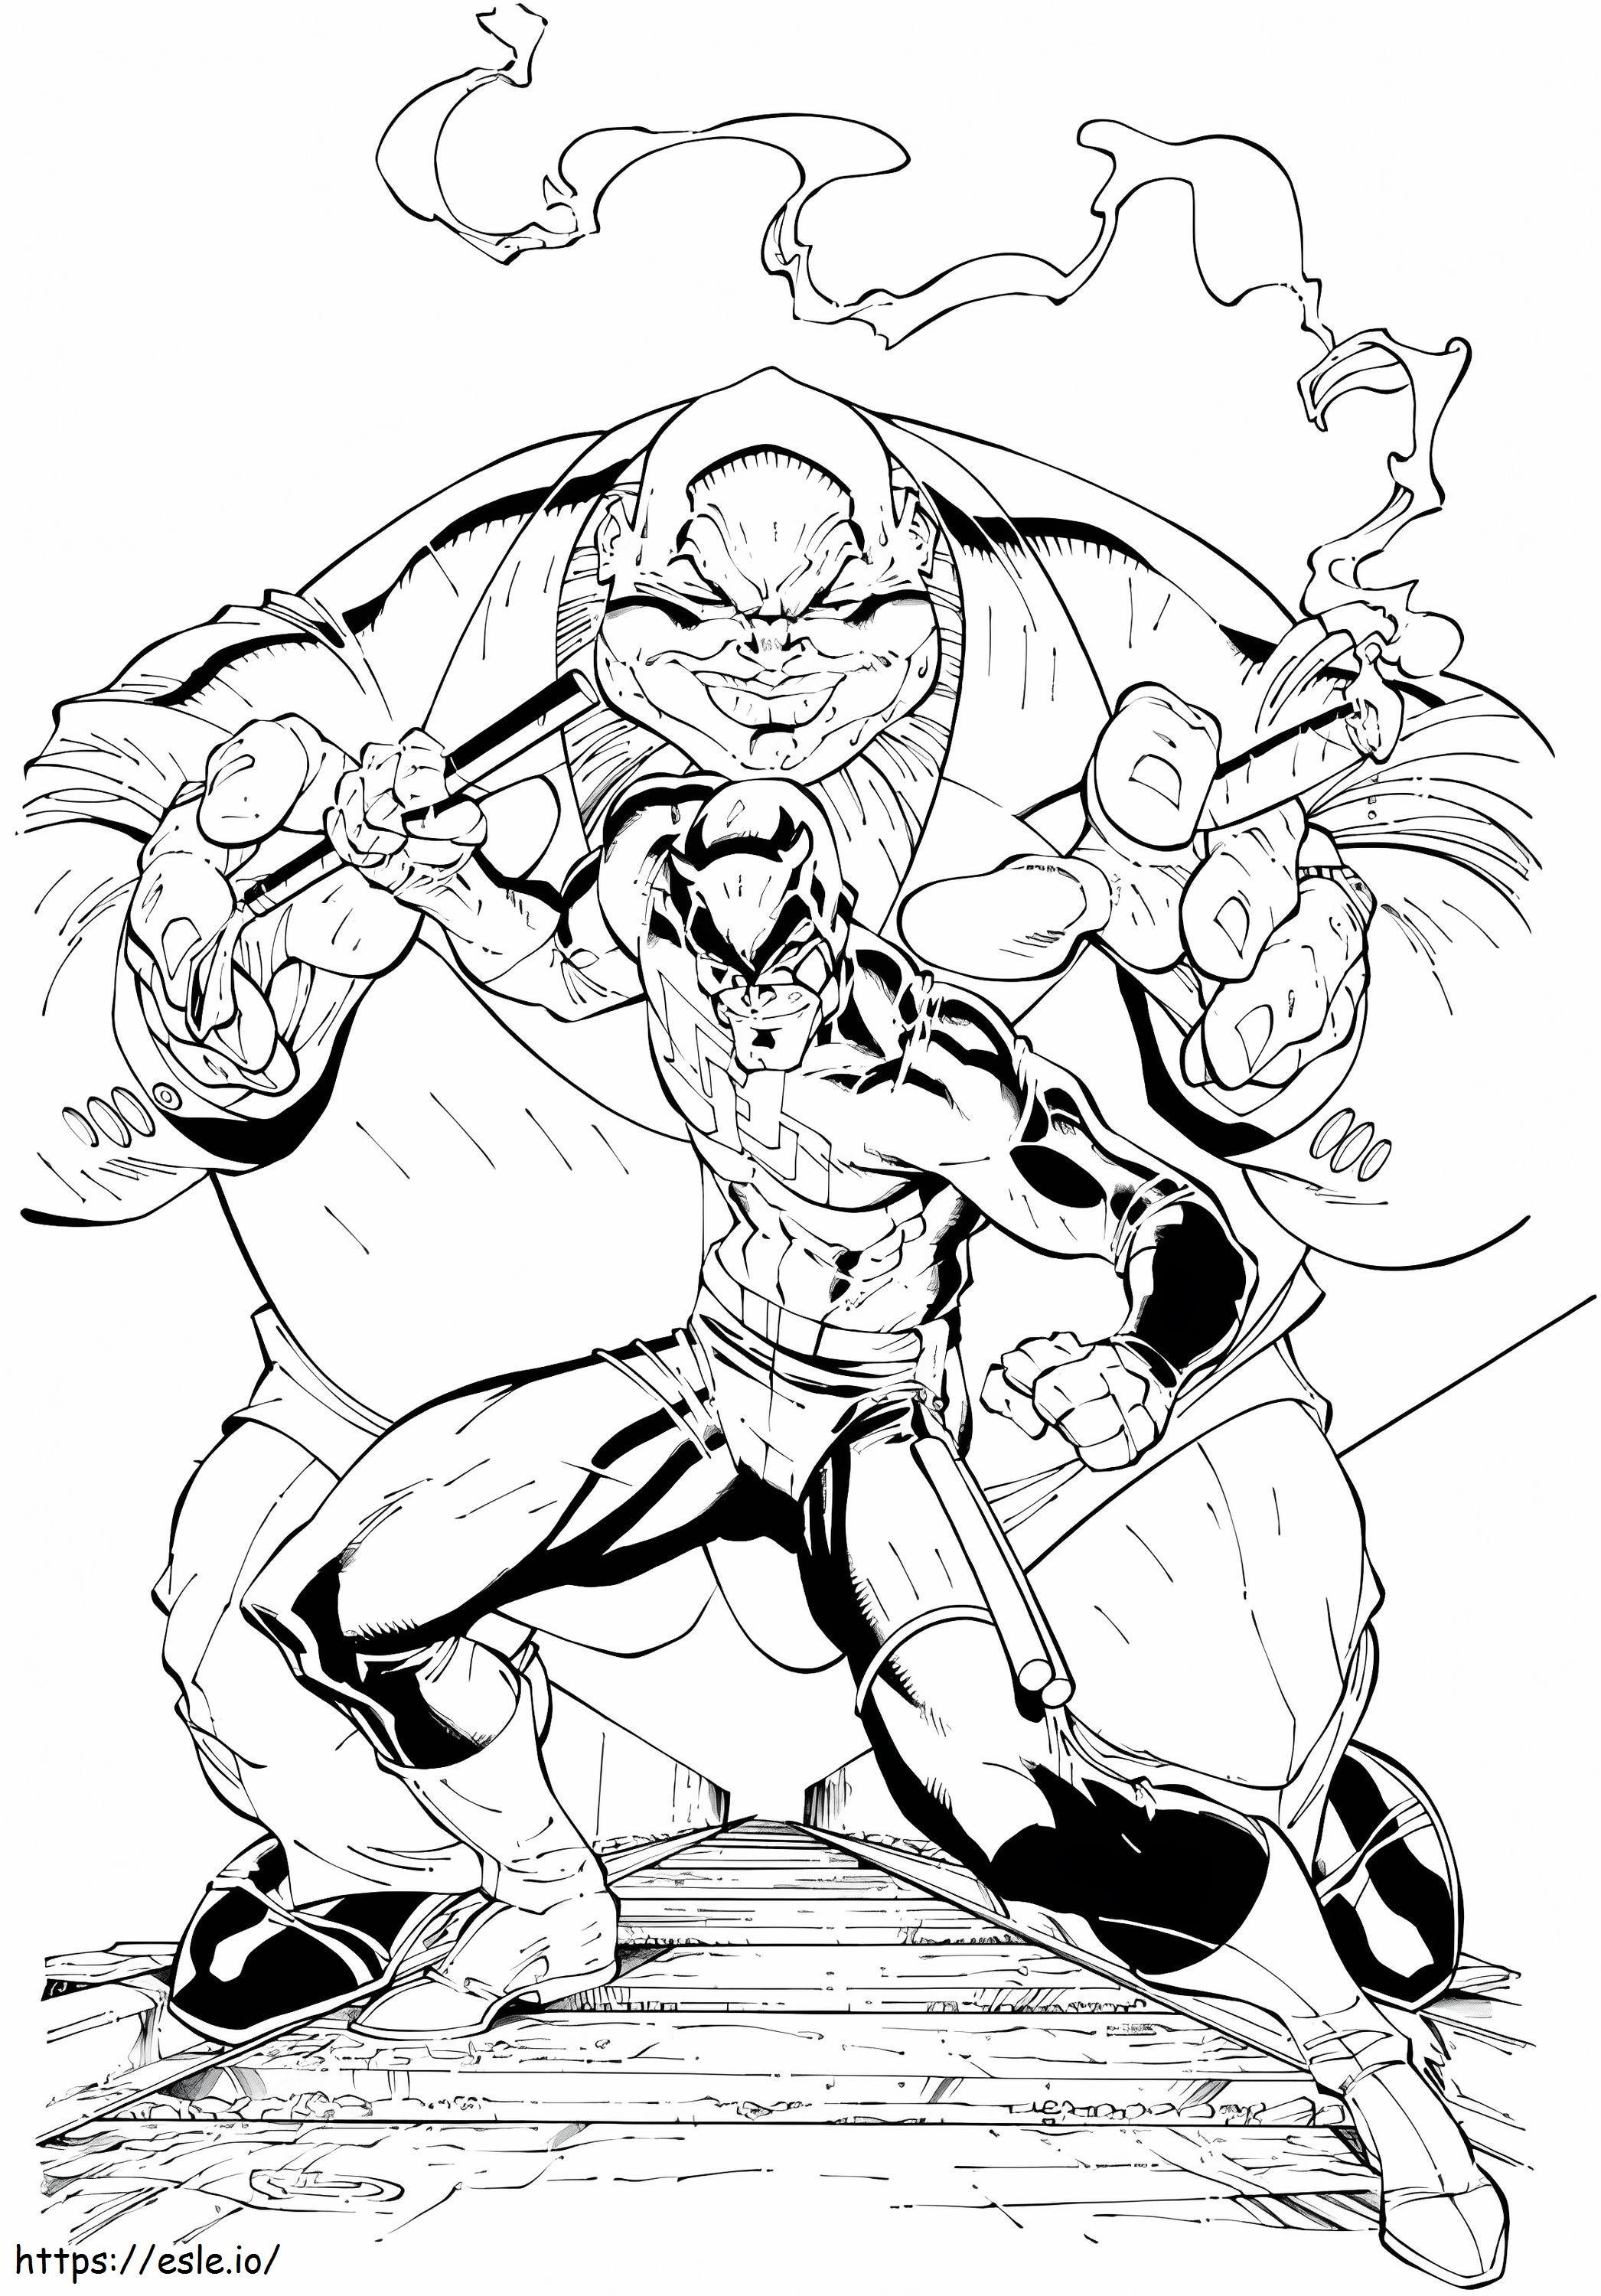 Kingpin And Daredevil coloring page